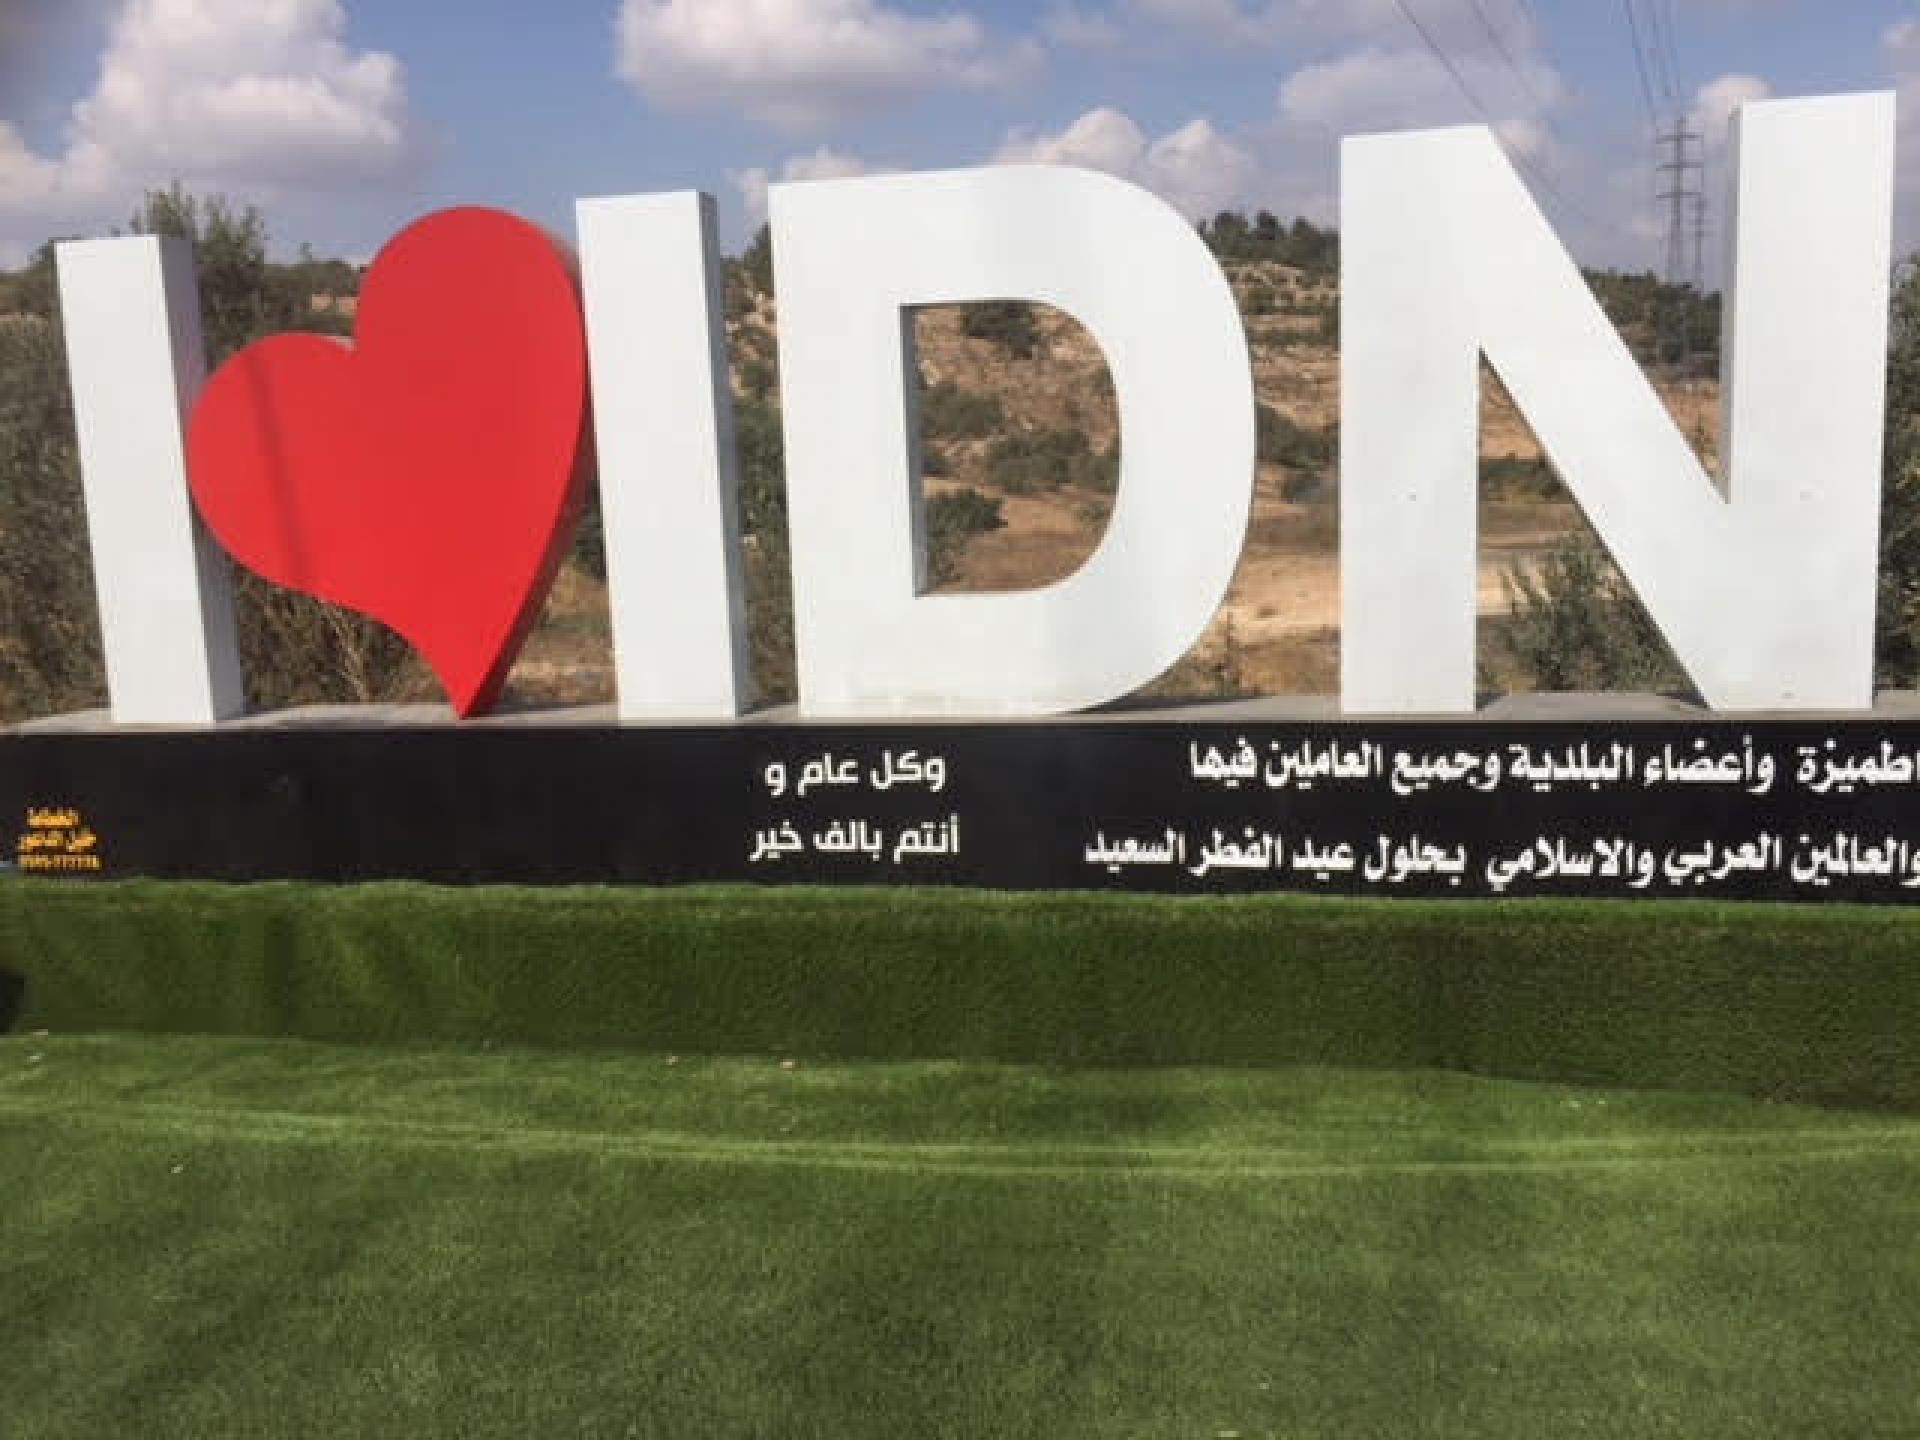 The sign at the entance to Idna